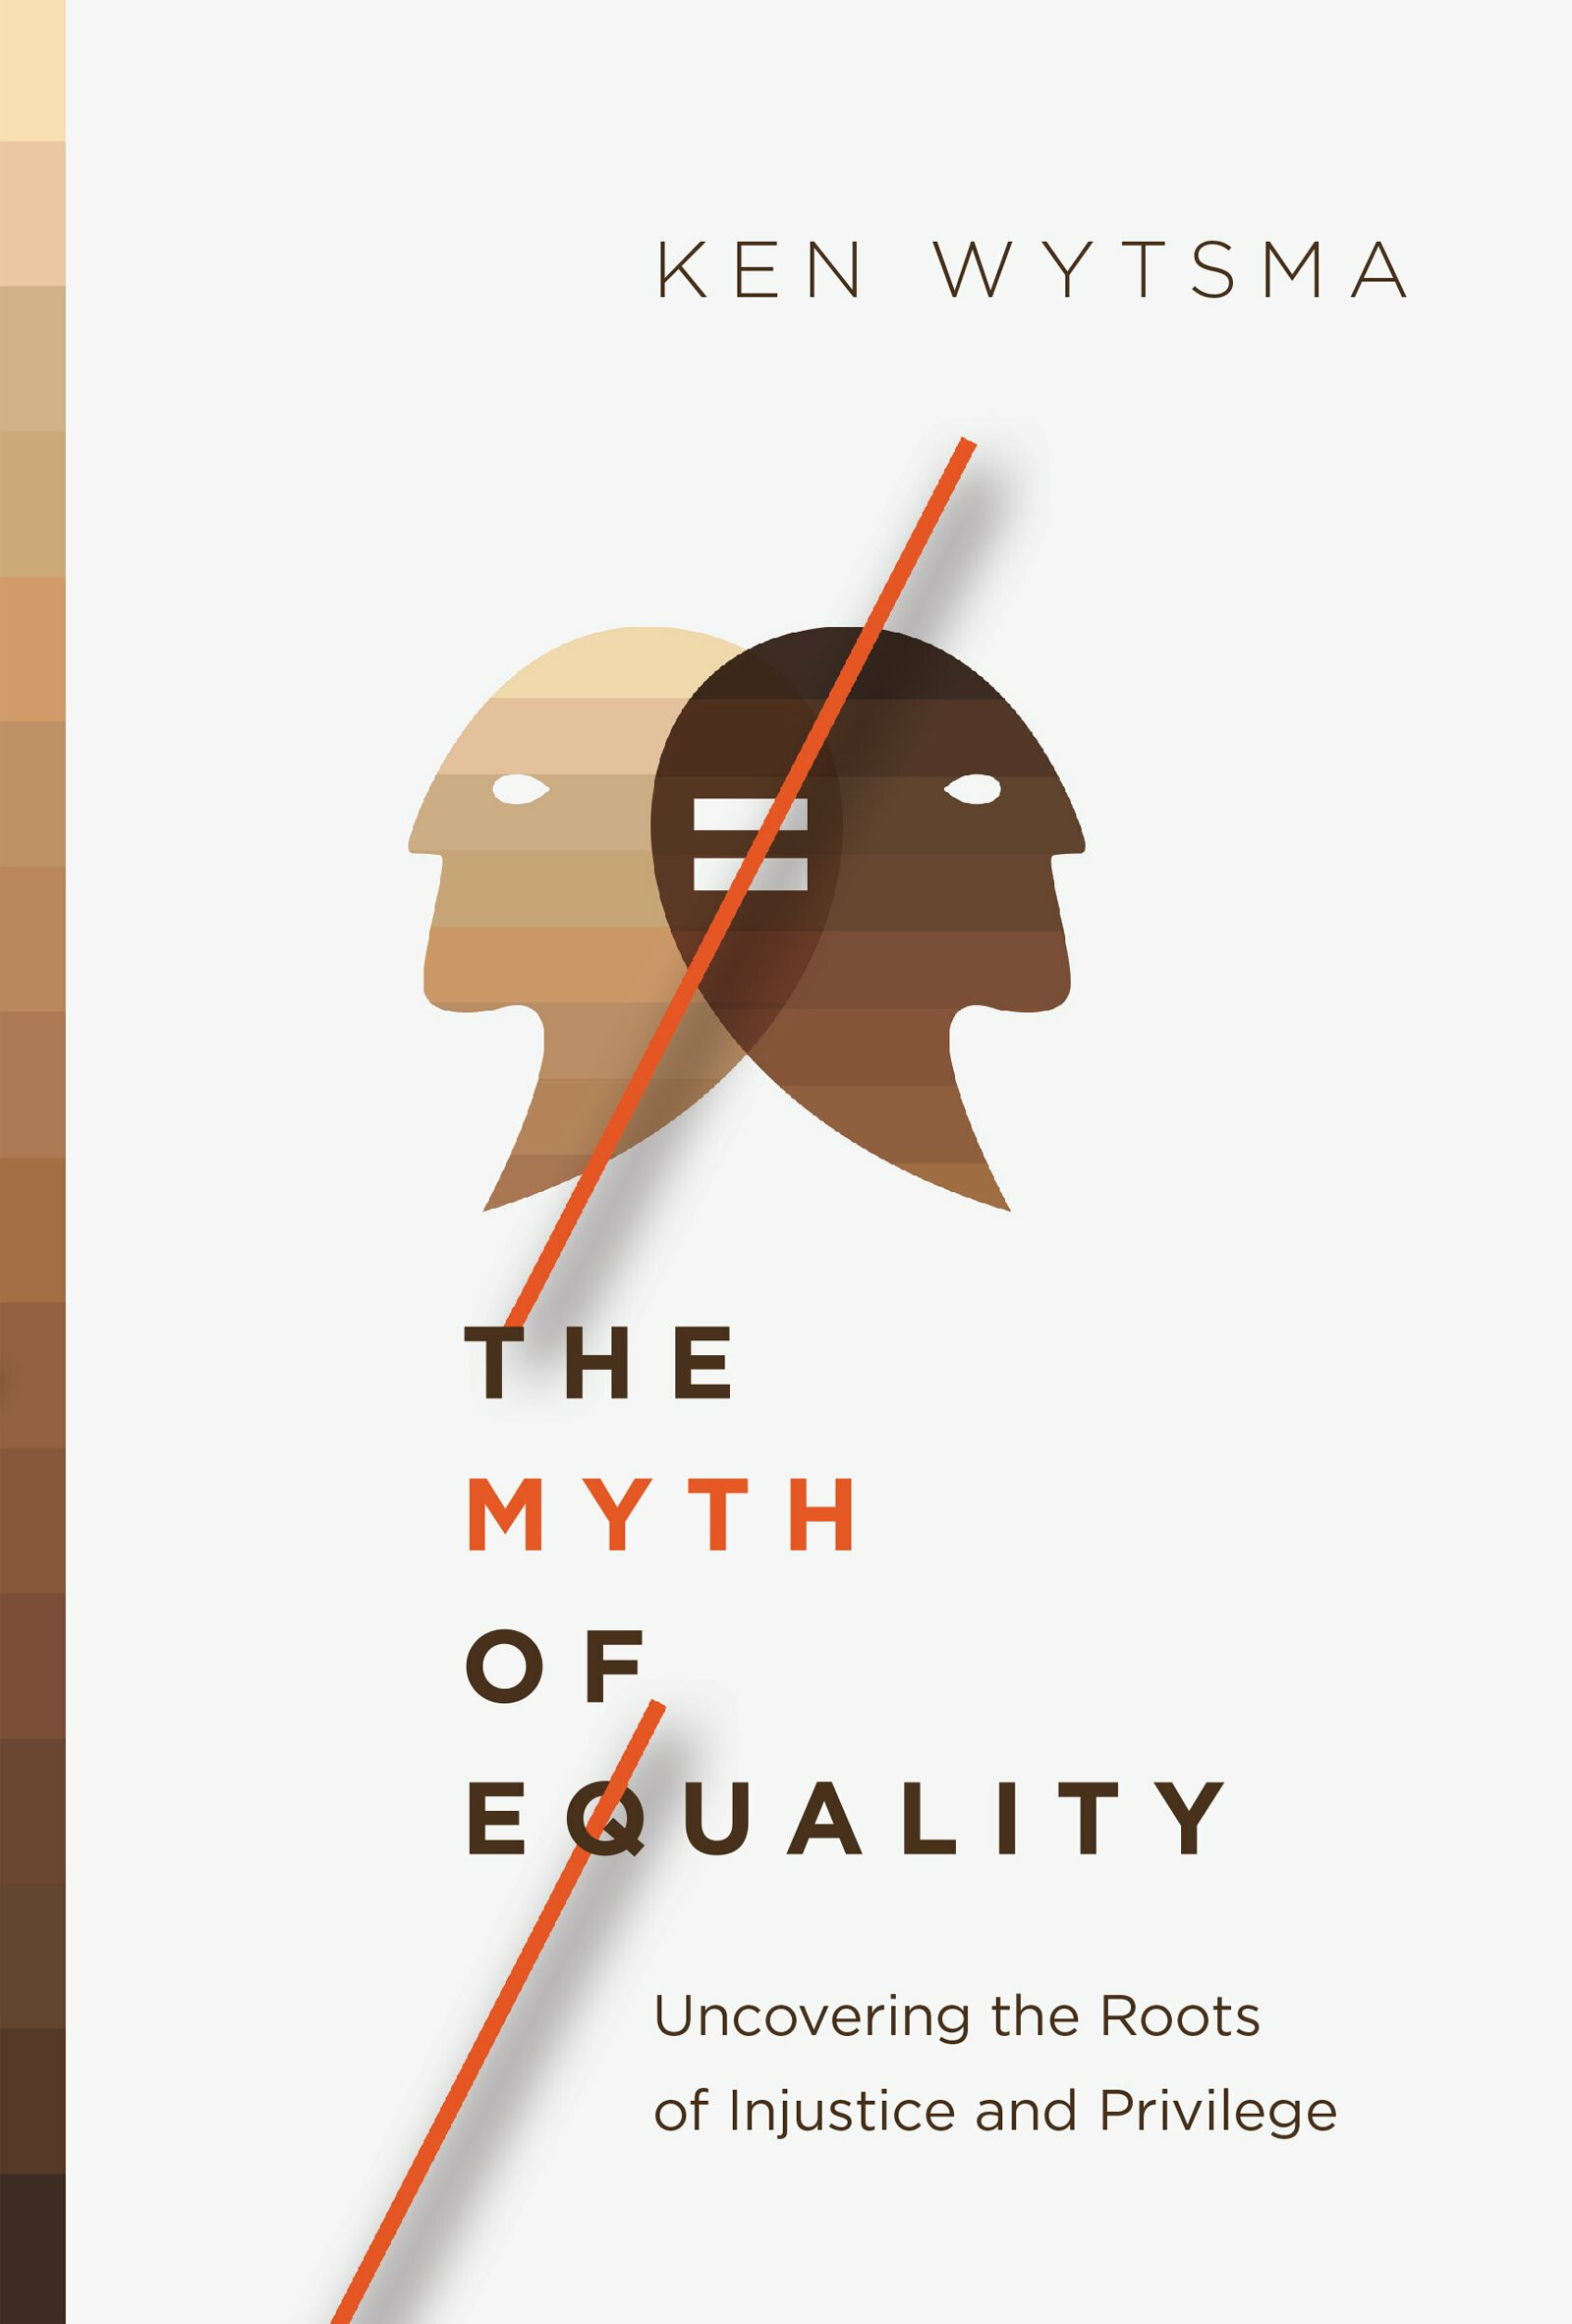 BOOK STUDY: The Myth of Equality - Uncovering the Roots of Injustice and Privilege by Ken Wytsma